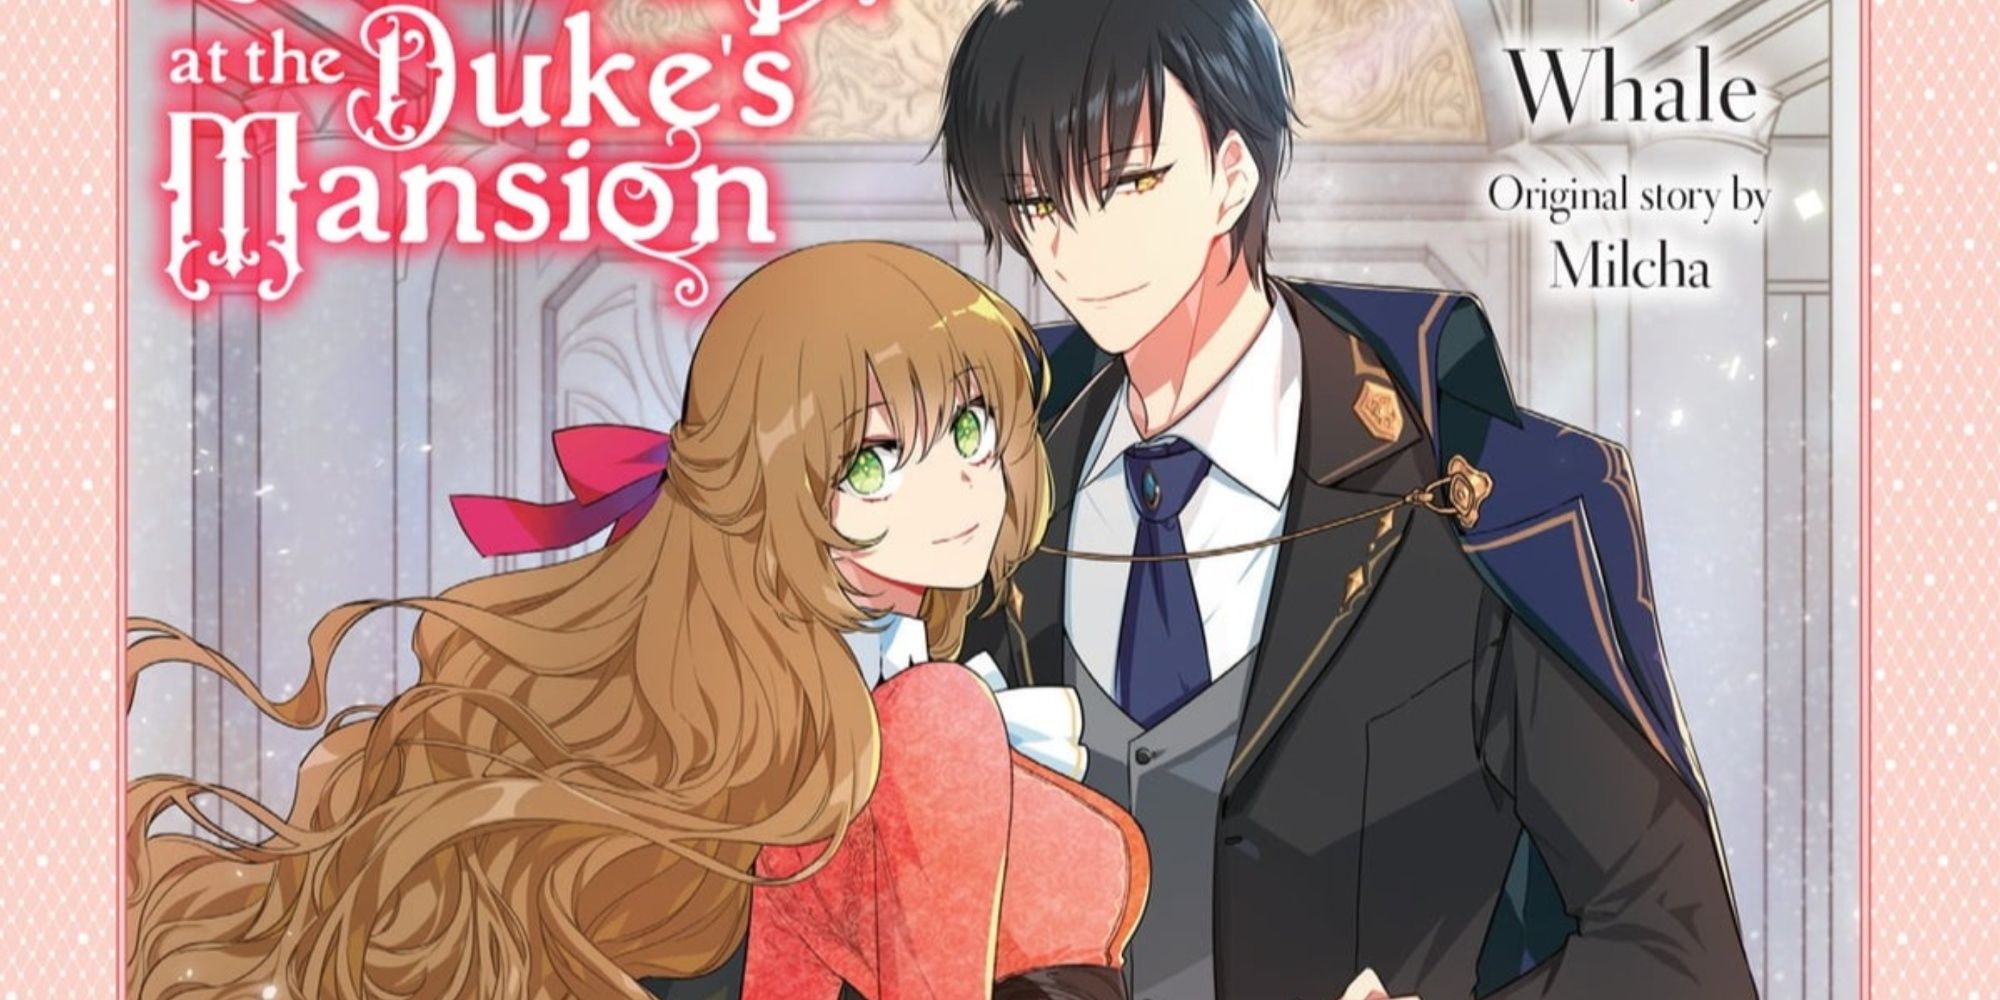 The Reason Why Raeliana Ended up at the Duke's Mansion Cover Art